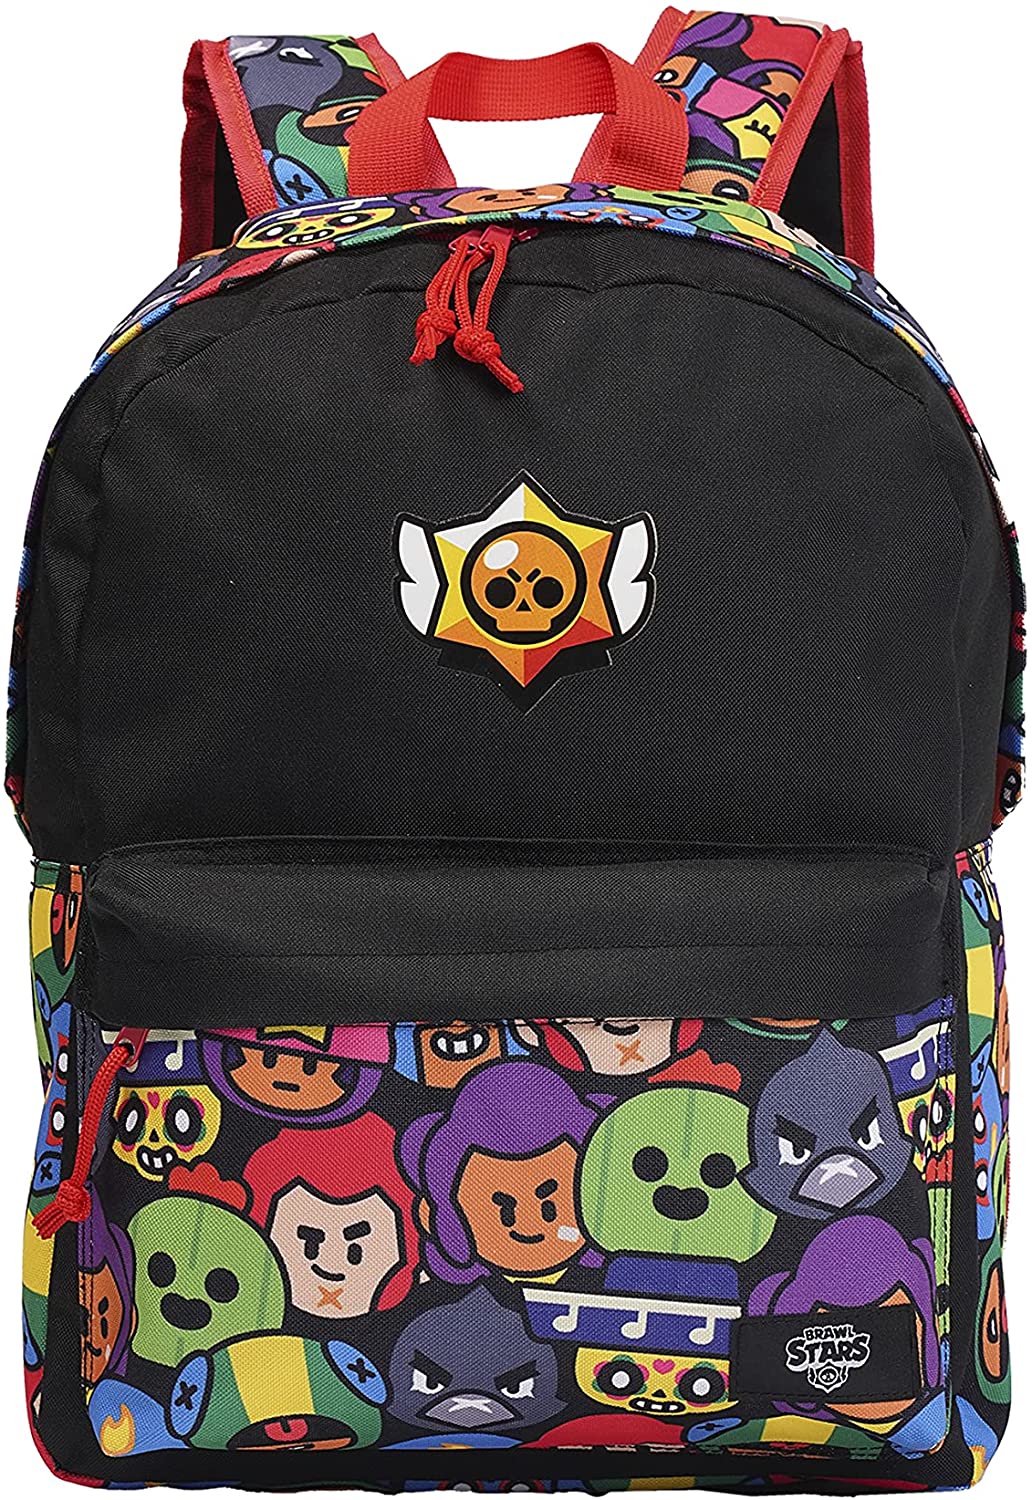 Youth Backpack Adaptable to Trolley Brawl Stars (CyP Brands)